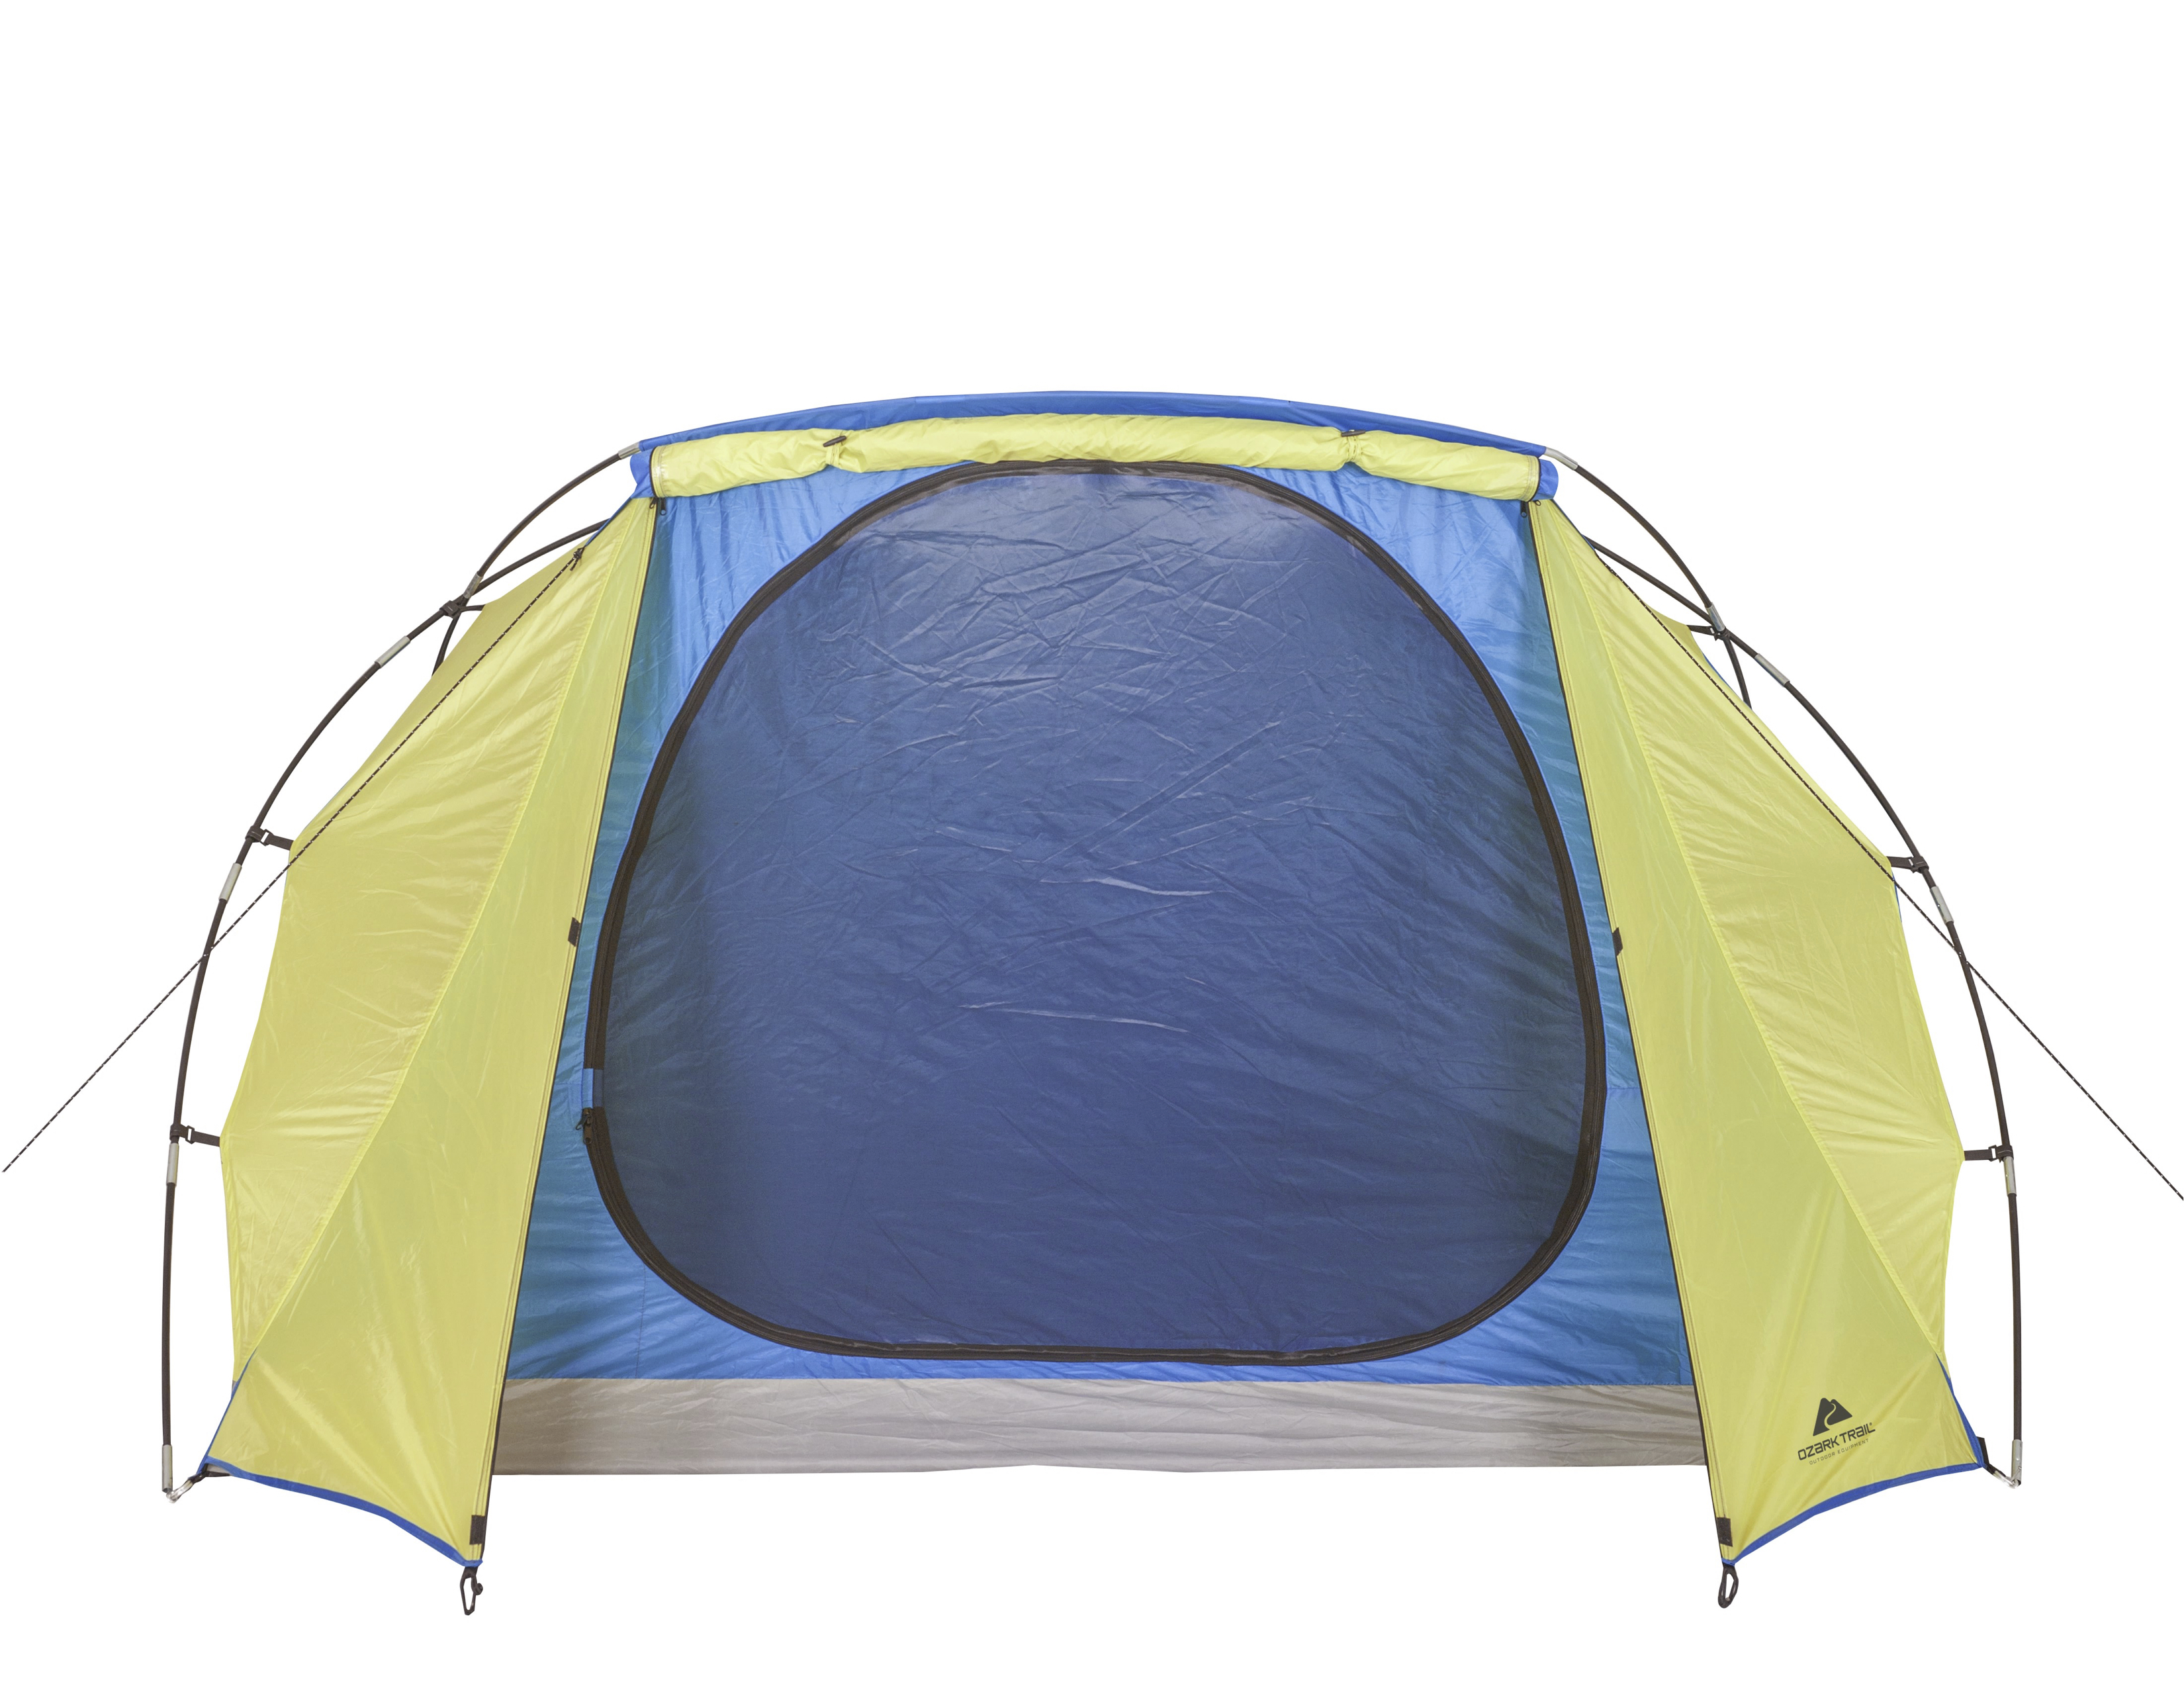 Ozark Trail 3-Person Backpacking Tent - image 2 of 12